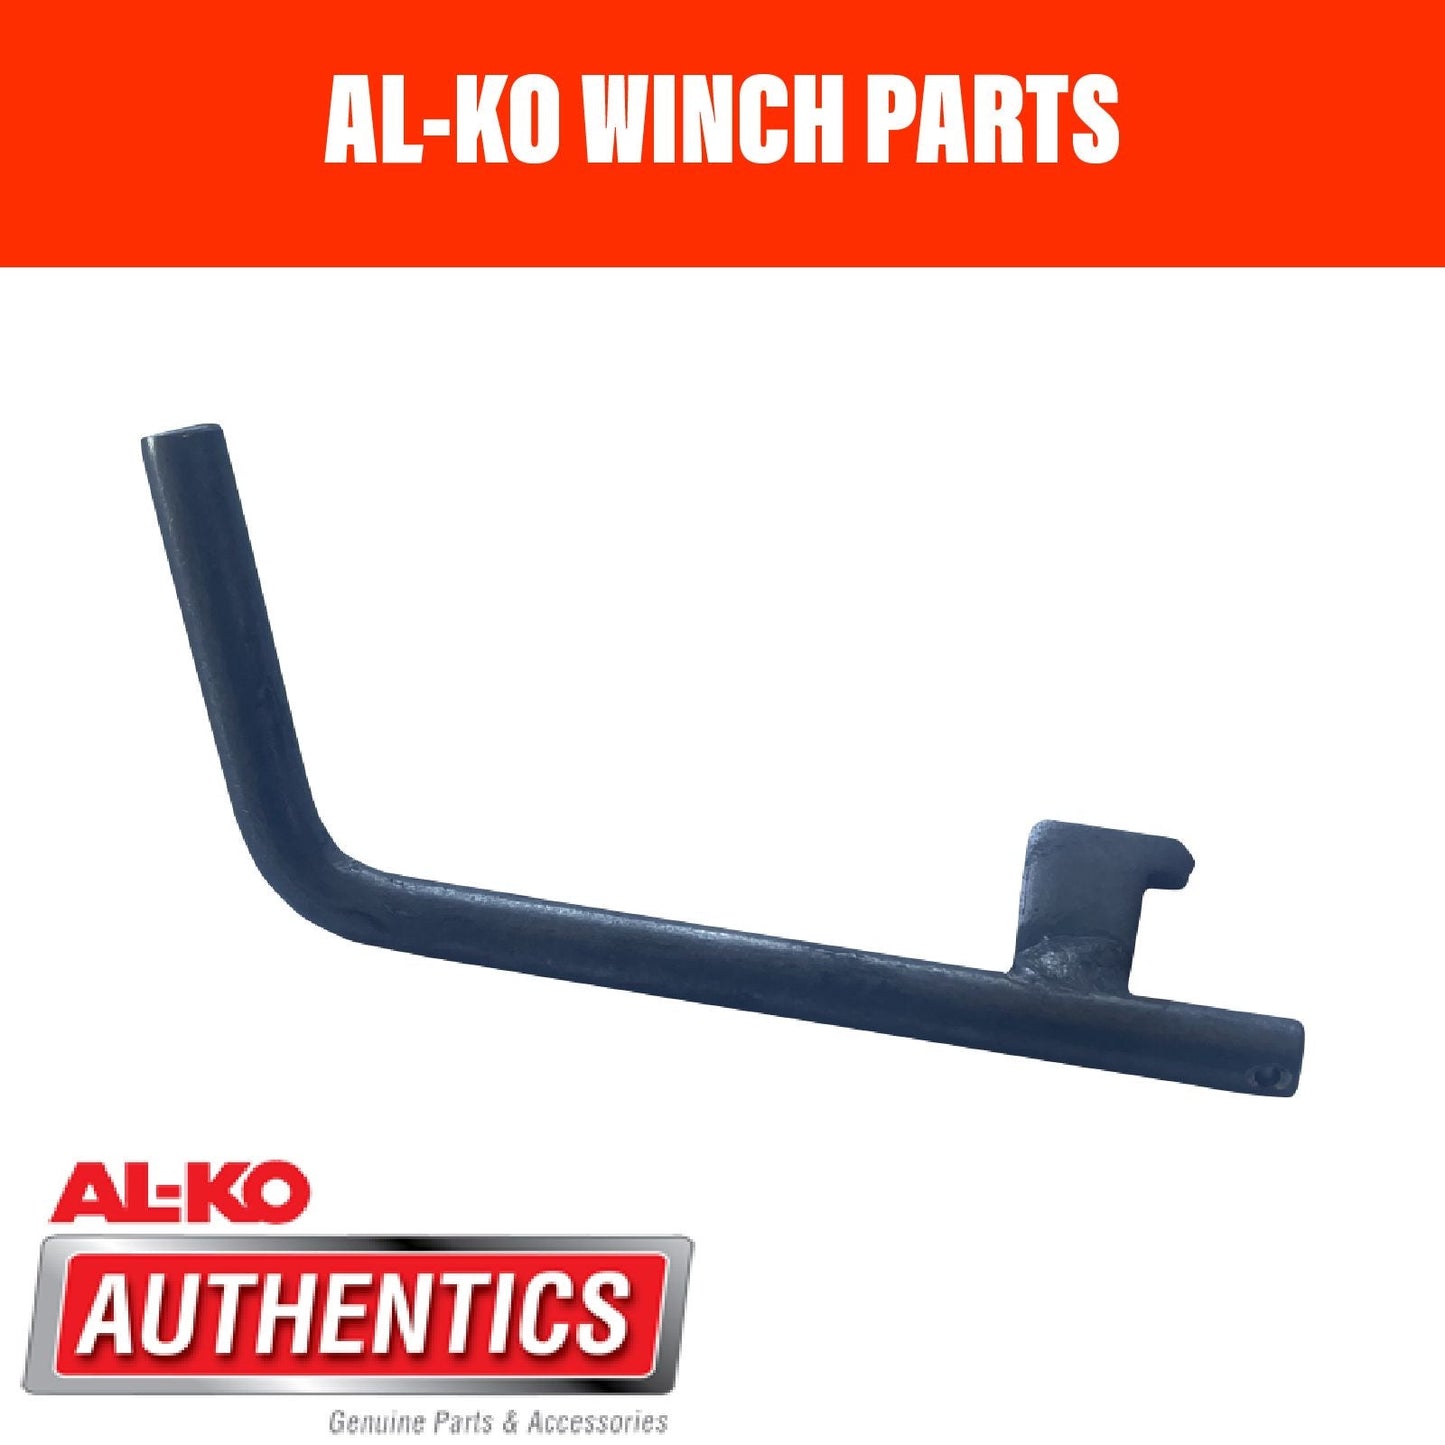 AL-KO  Winch Pawl Stainless Steel Suits 15:1 Winches